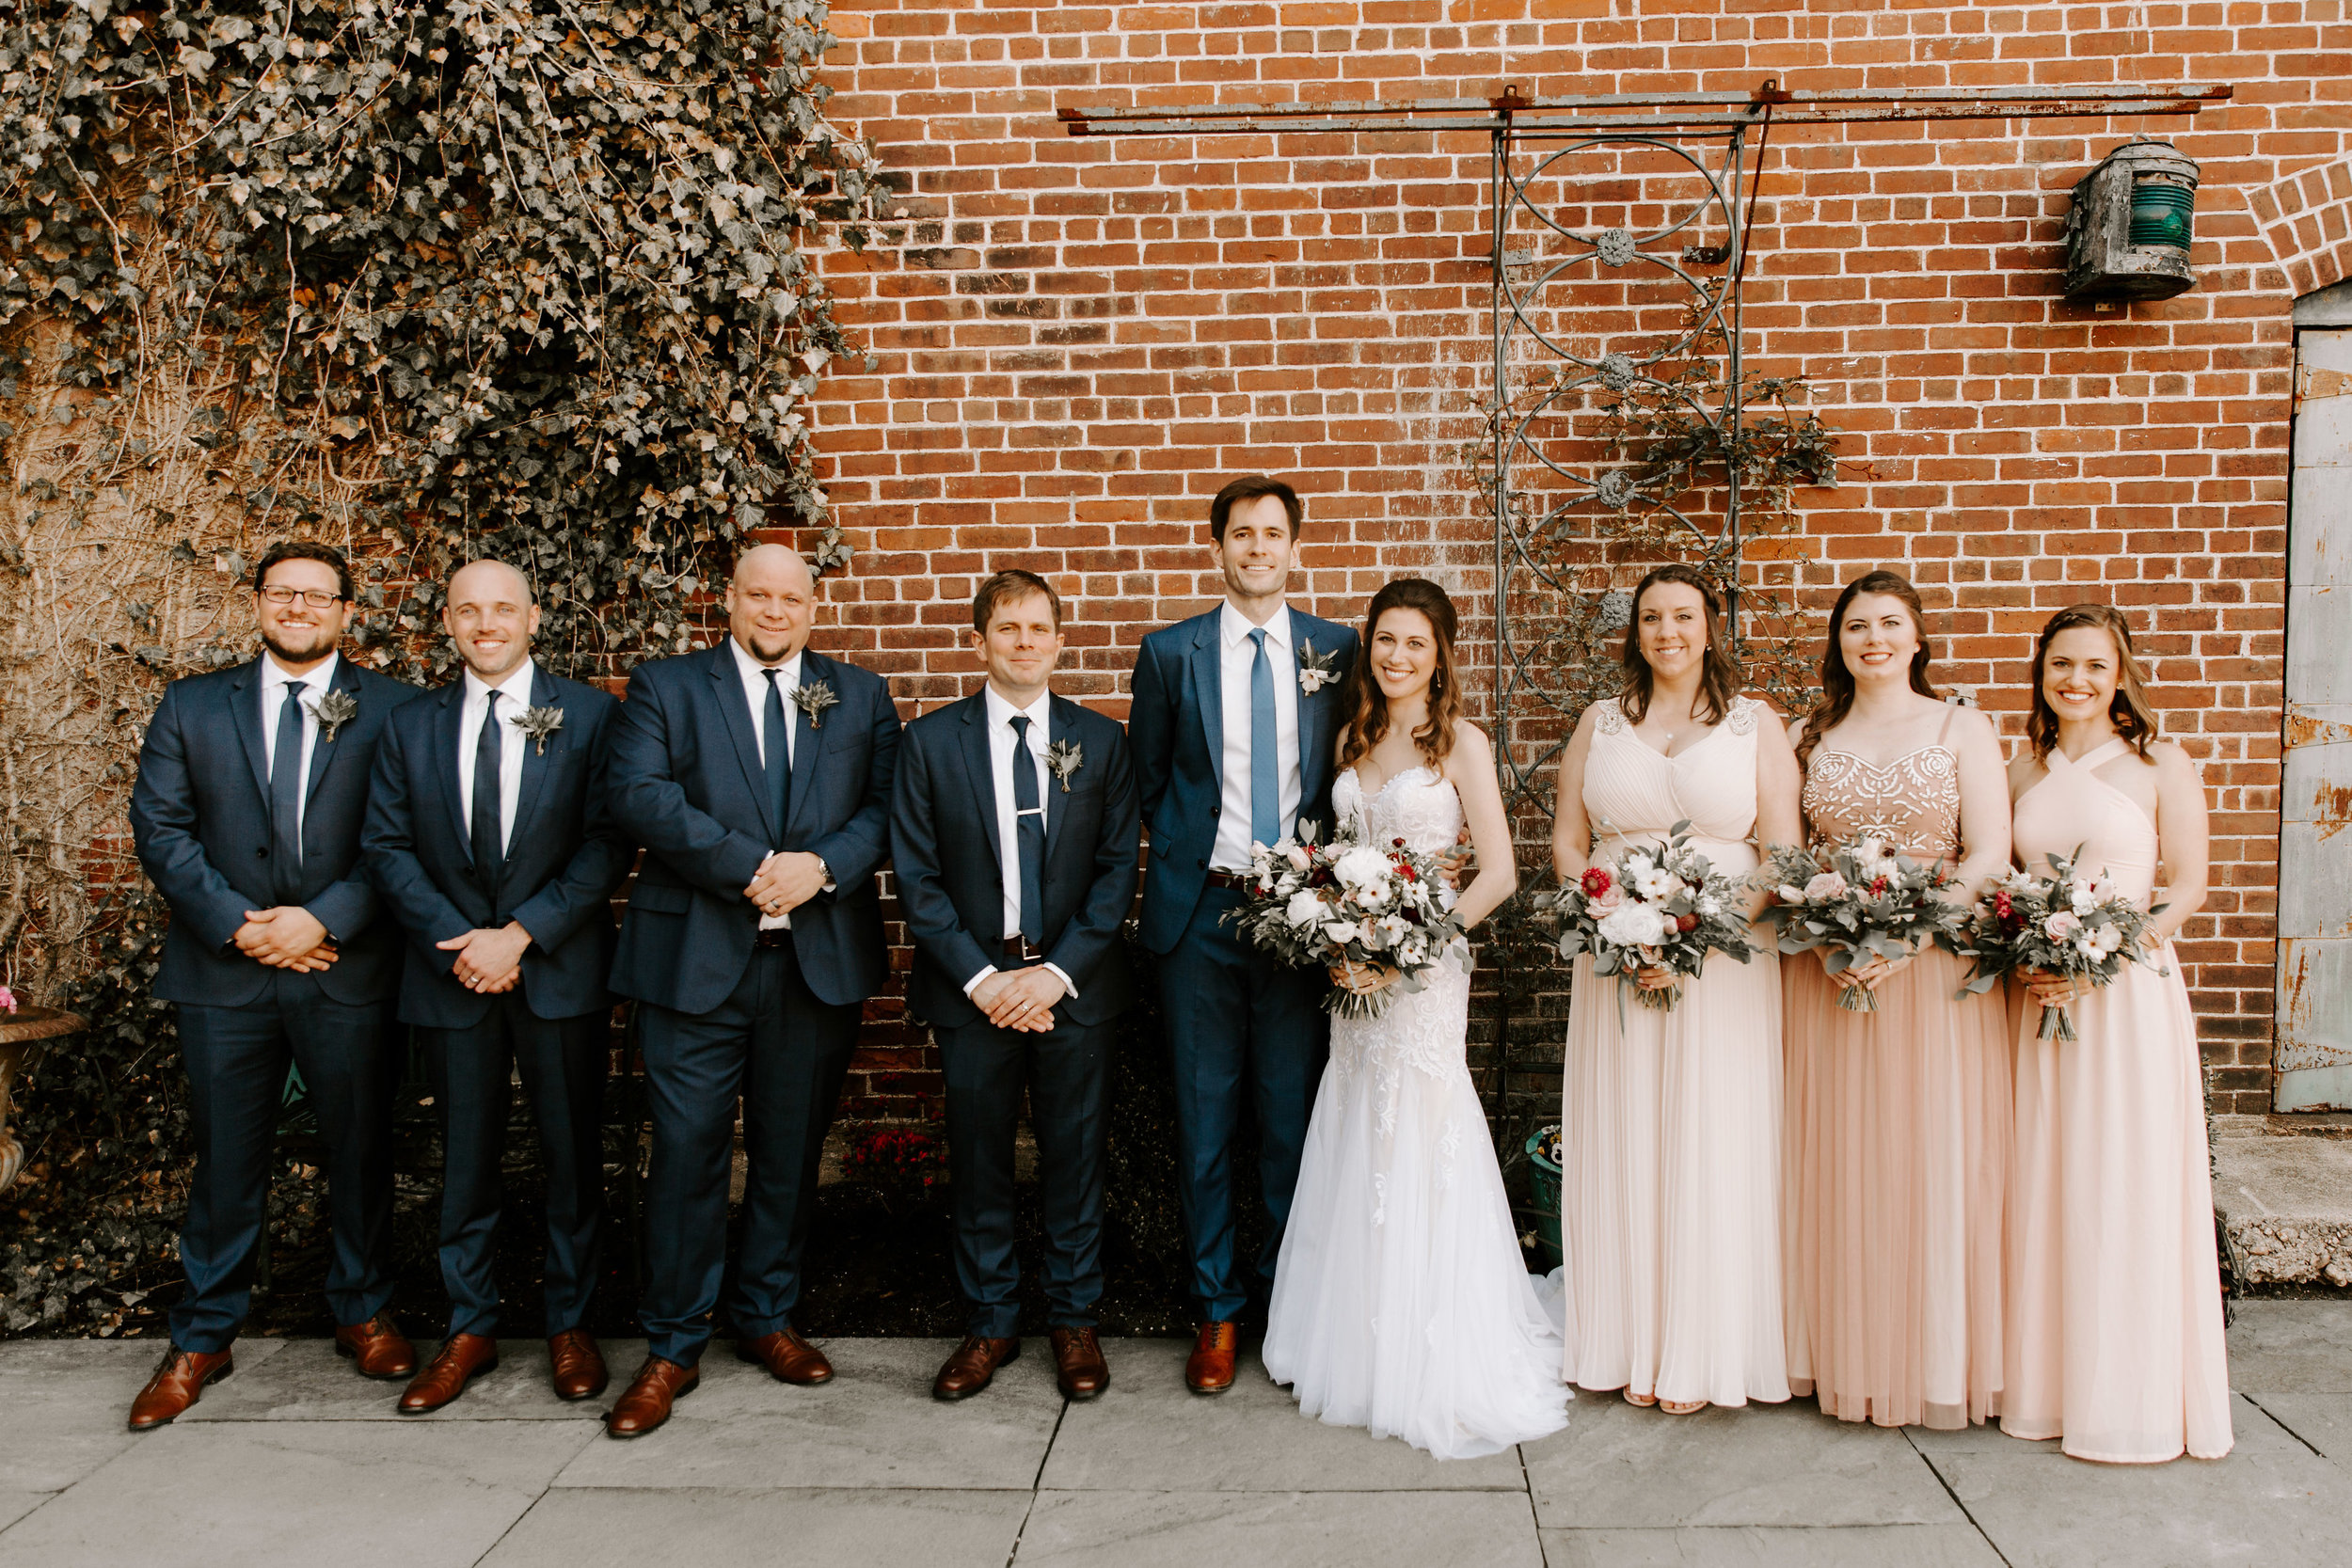 The wedding party photos! - Pearl Weddings & Events